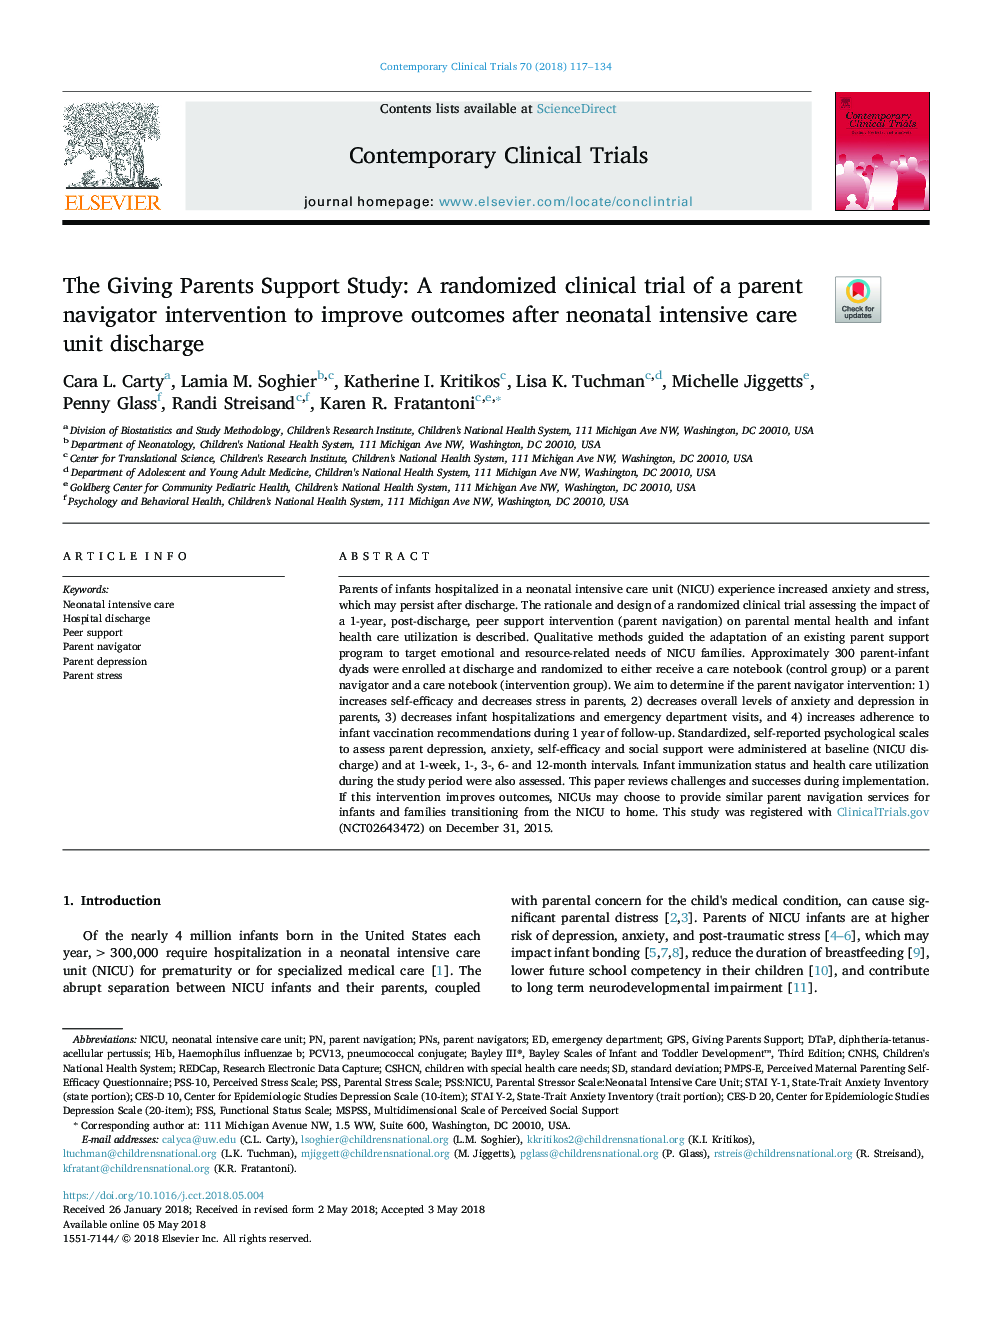 The Giving Parents Support Study: A randomized clinical trial of a parent navigator intervention to improve outcomes after neonatal intensive care unit discharge